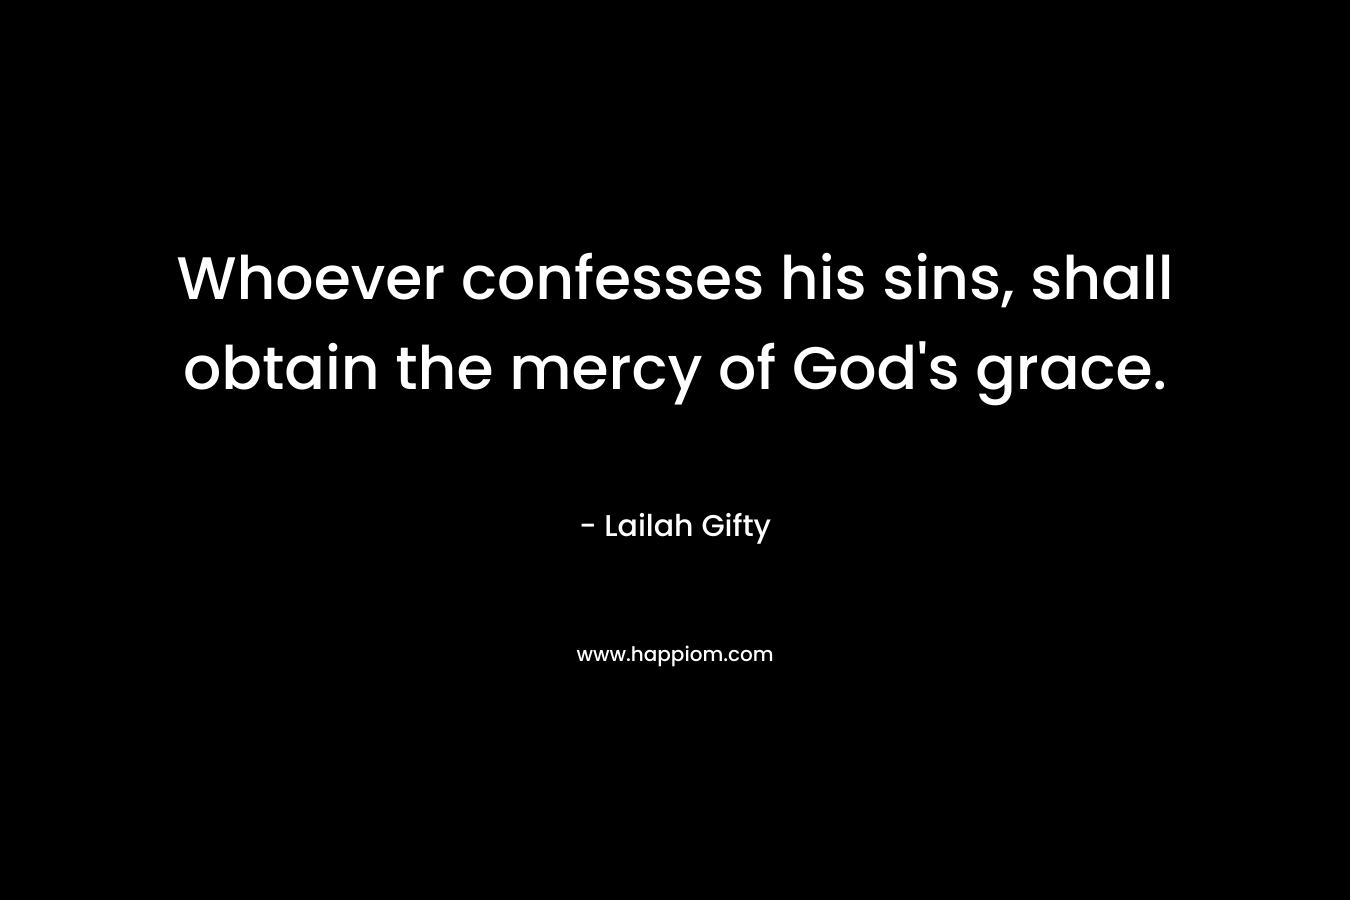 Whoever confesses his sins, shall obtain the mercy of God's grace.